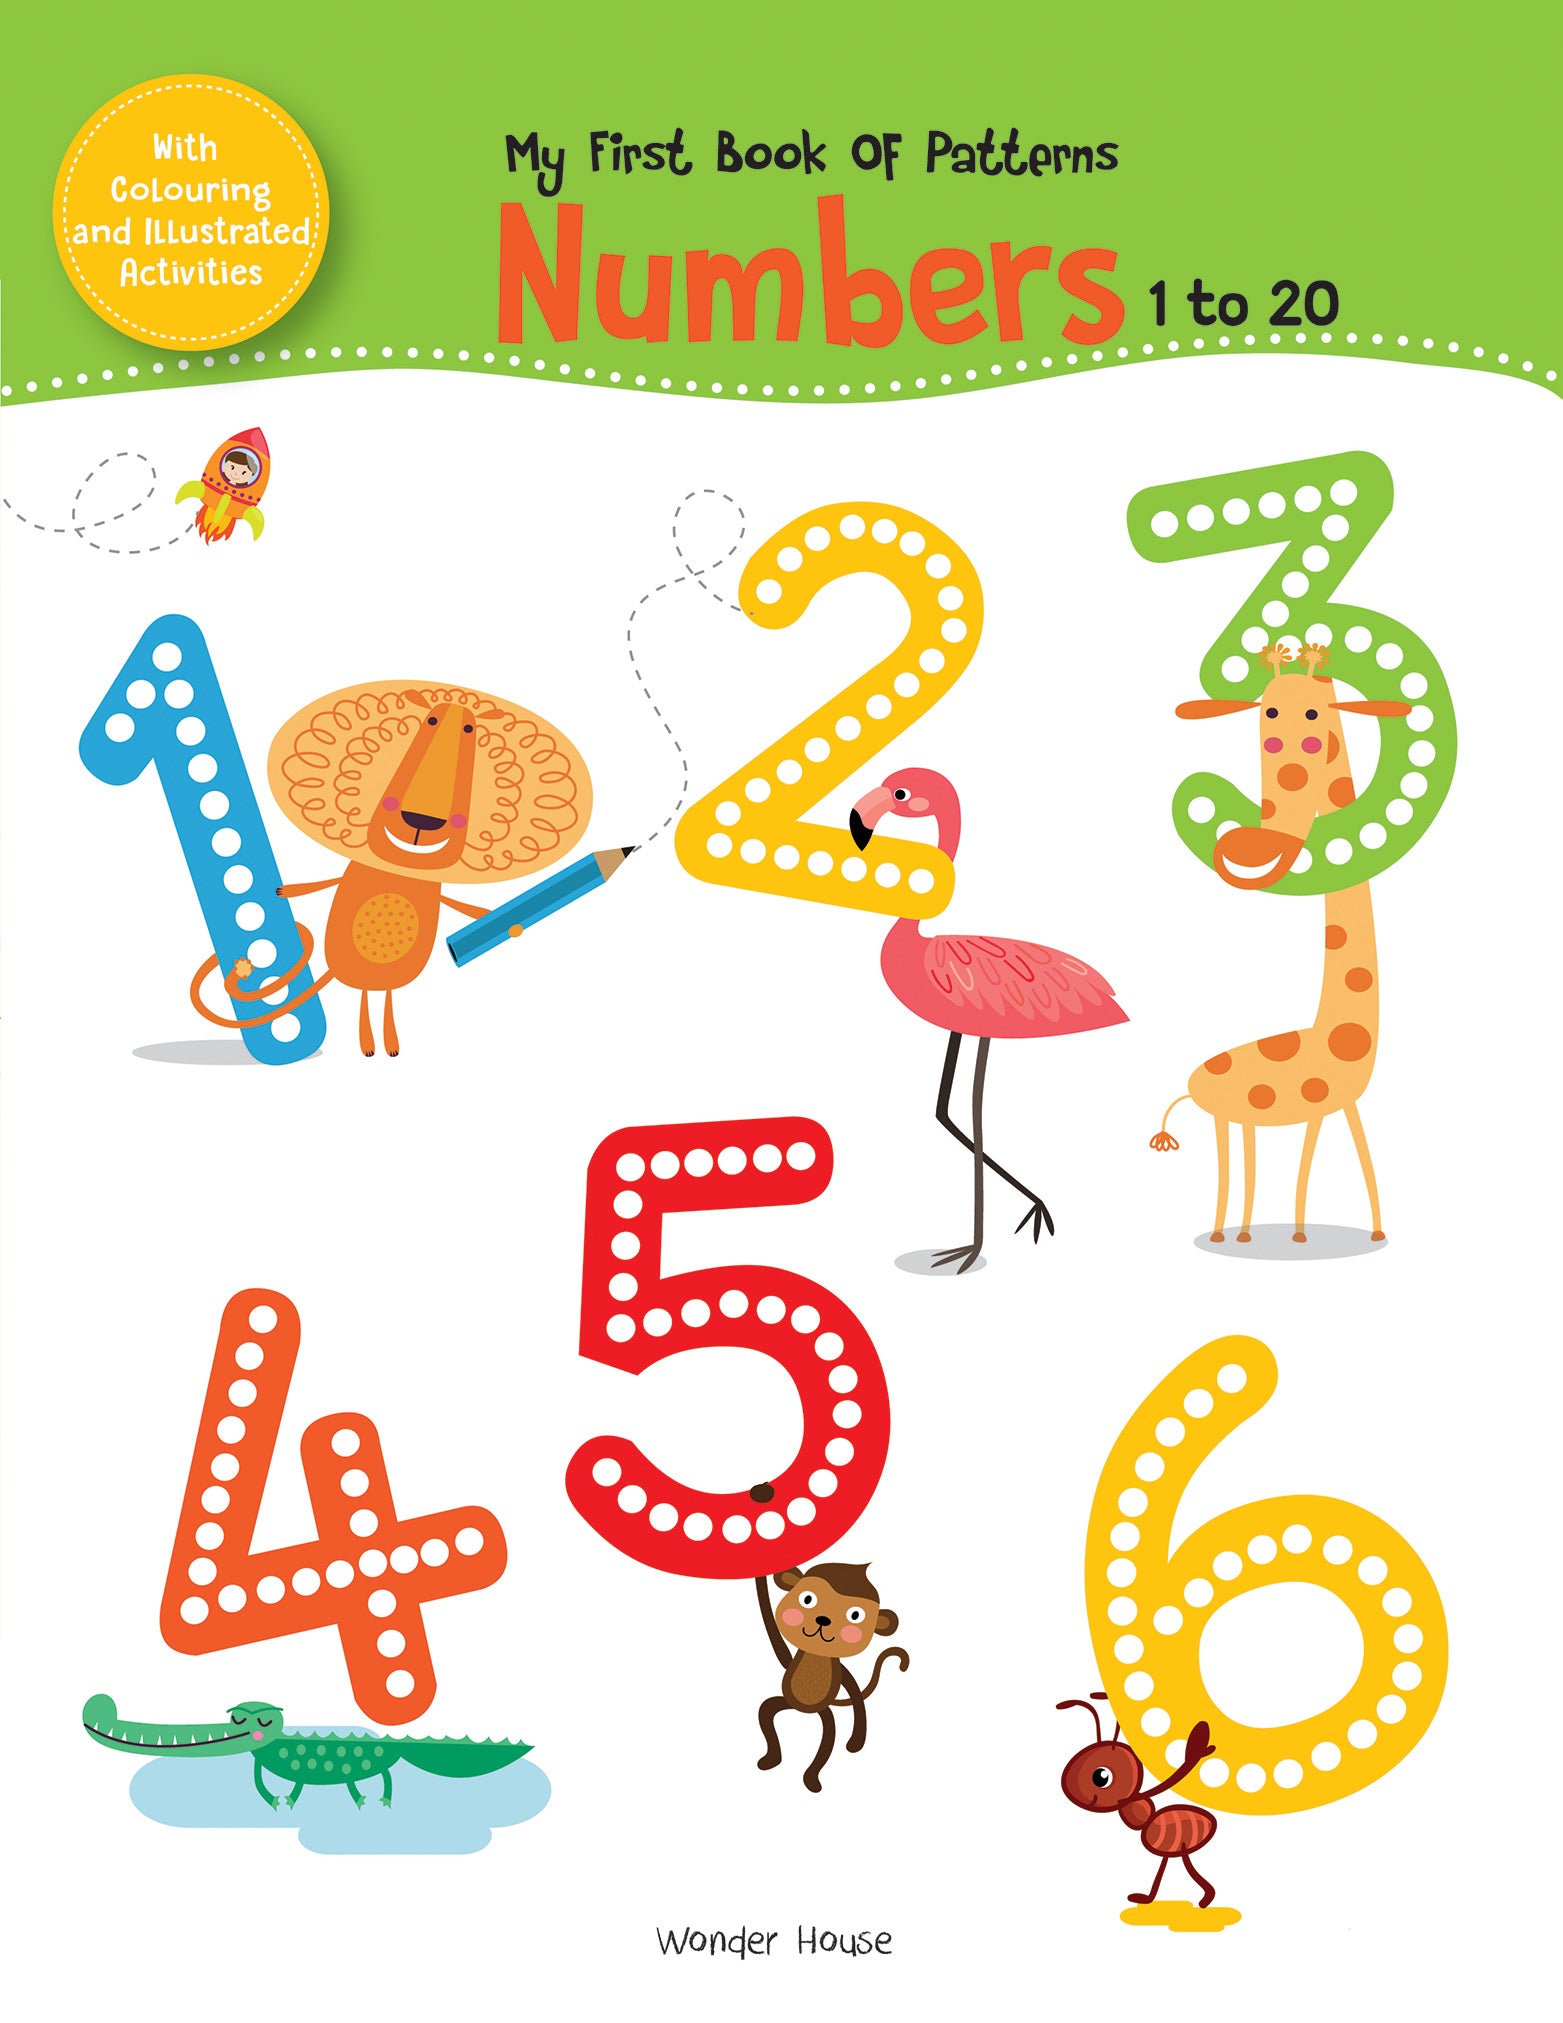 My First Book of Patterns Numbers 1 to 20: Write and Practice Patterns and Numbers 1 to 20